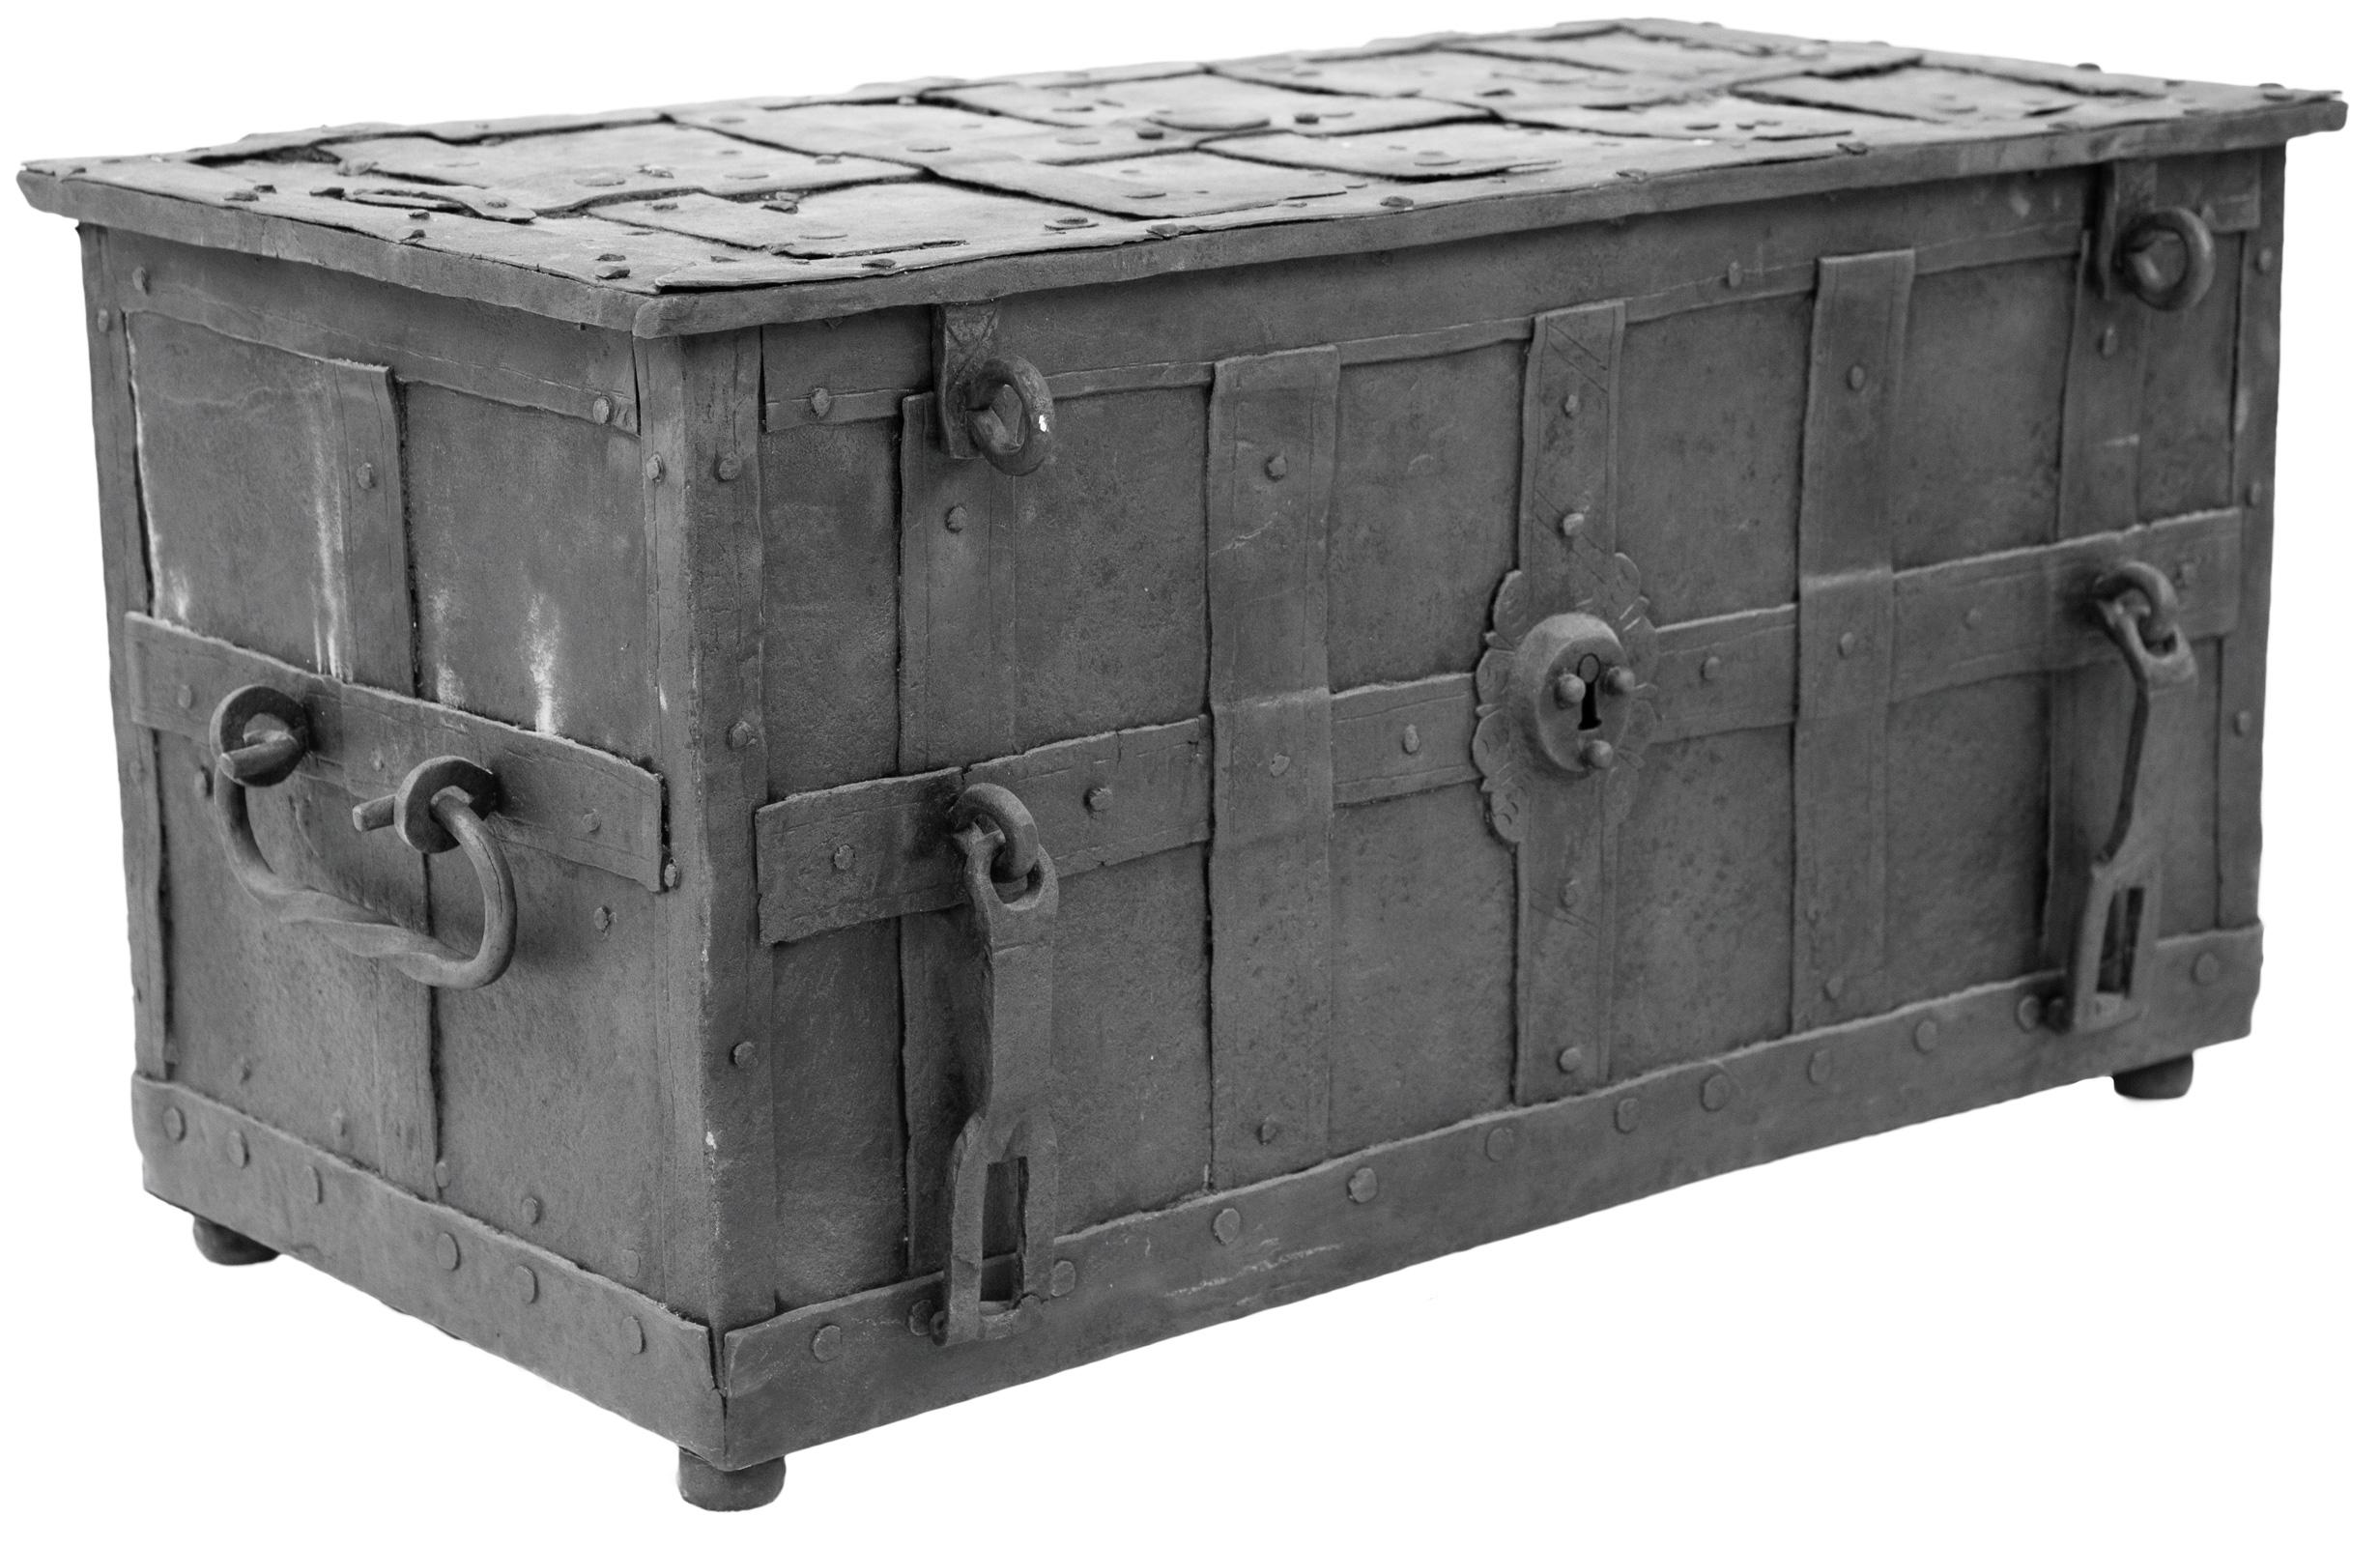 A 17th century iron strong box. The rectangular chest clad in studded, interwoven straps incorporating an ornamental escutcheon for a faux lock to the front flanked by padlock hasps, with a sliding flap concealing a keyhole with key to the top. The